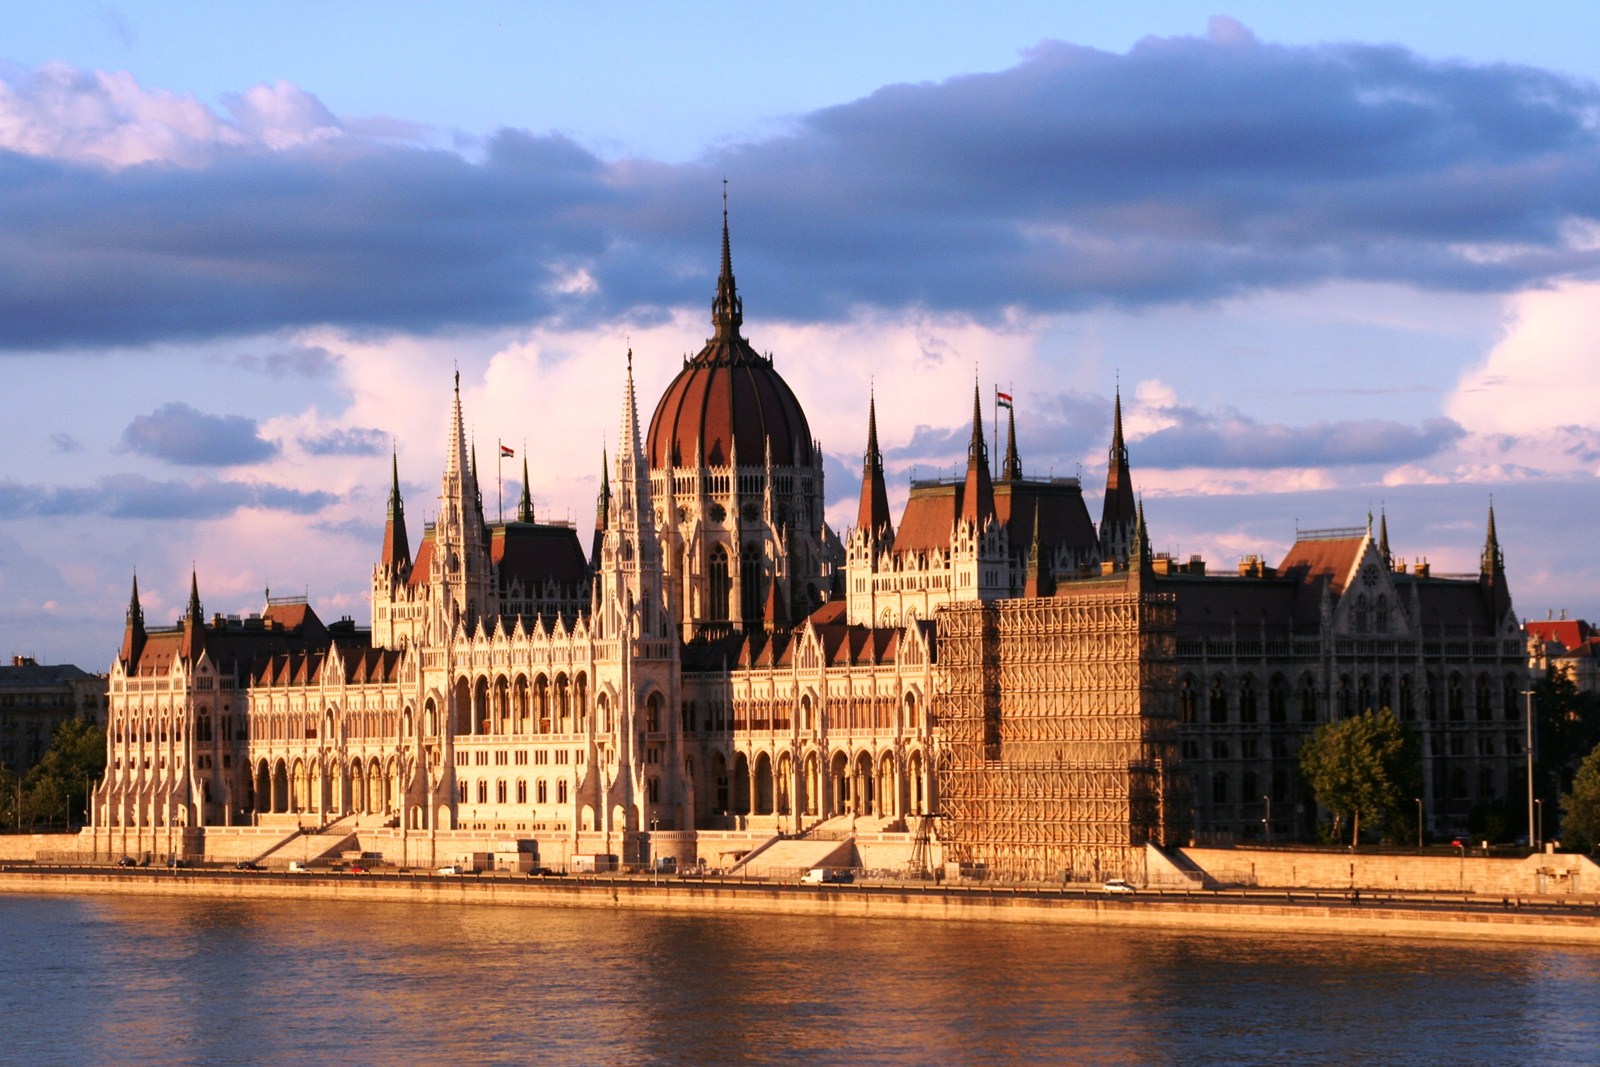 Folklore festival "The Pearl of Danube" Budapest - Official page